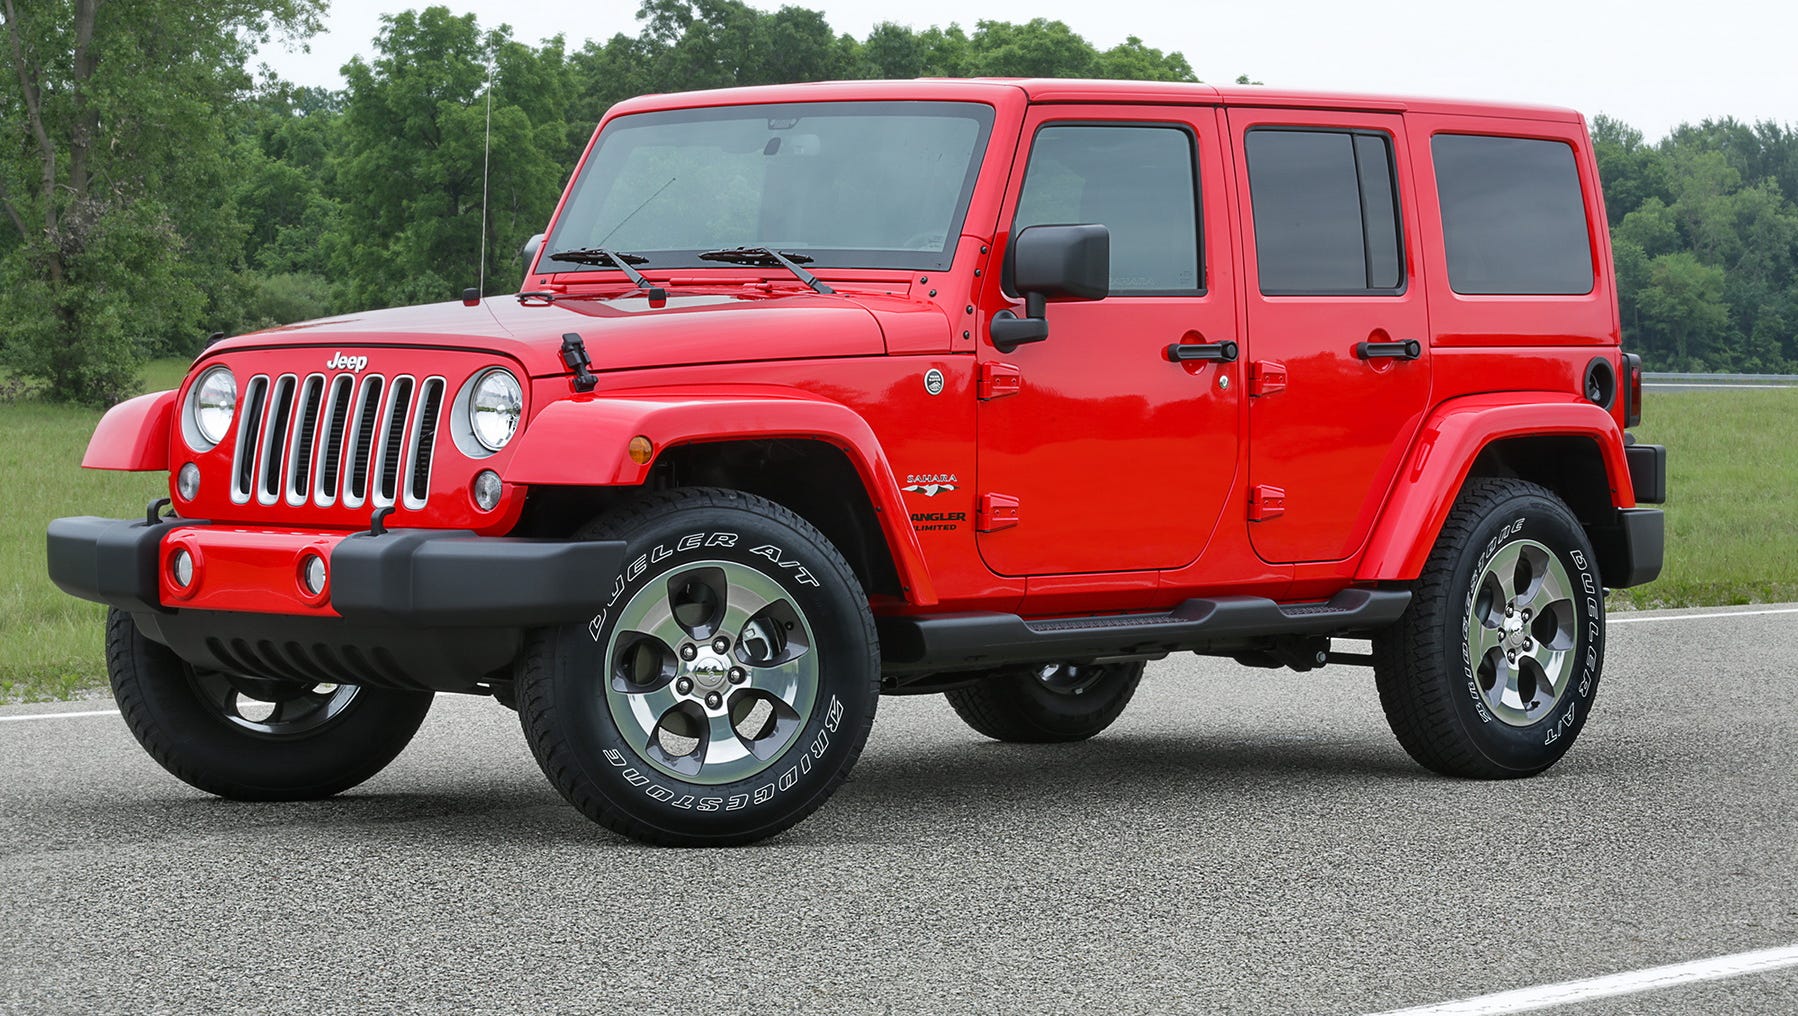 2017 Jeep Wrangler Unlimited capable off-road